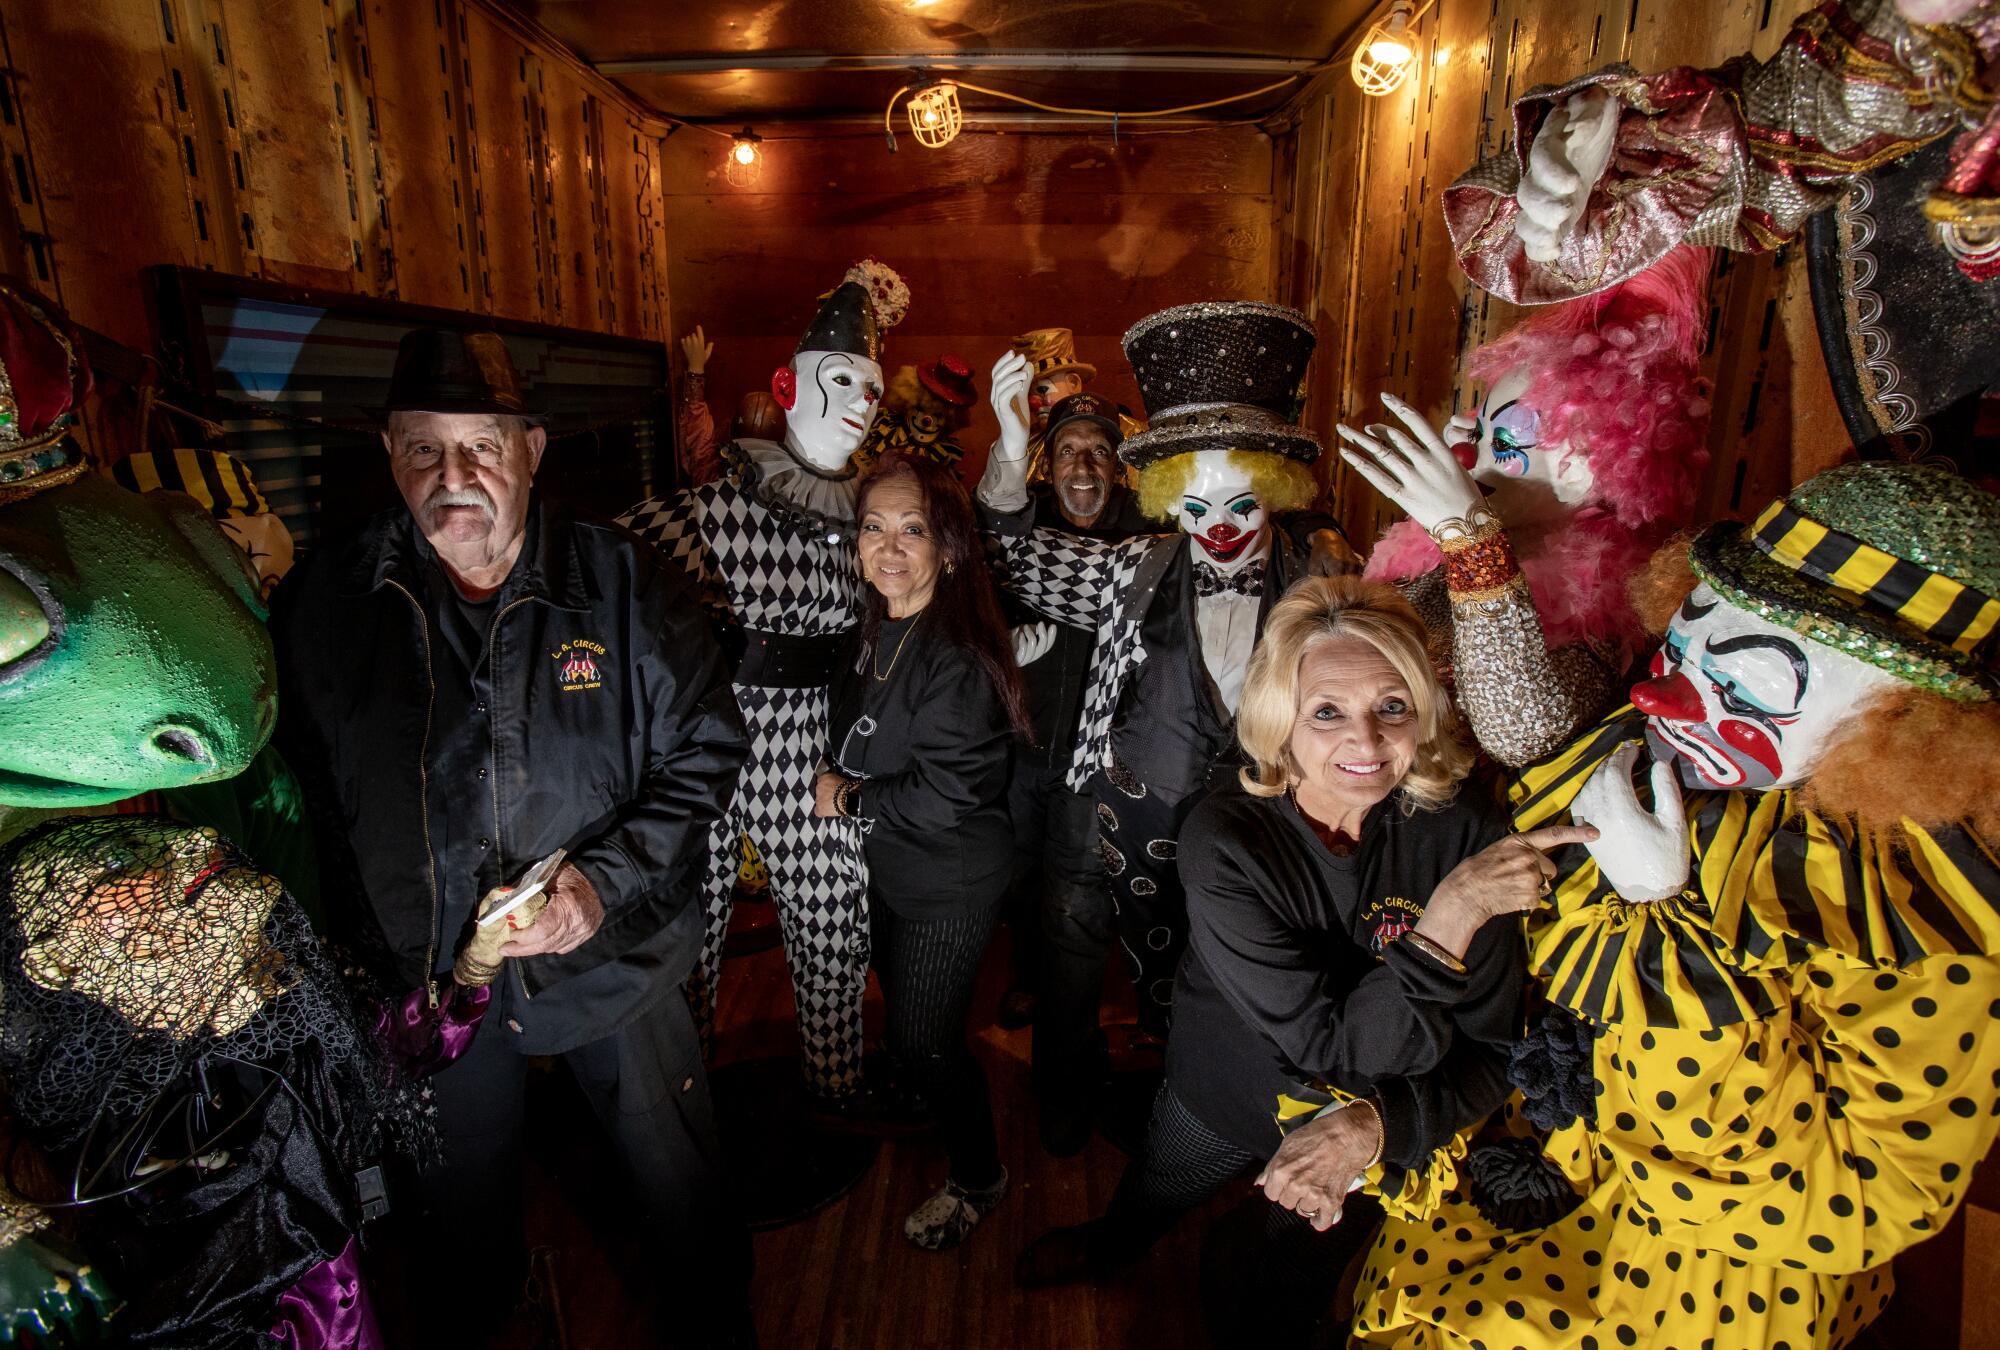 People stand next to clown statues in a prop house.